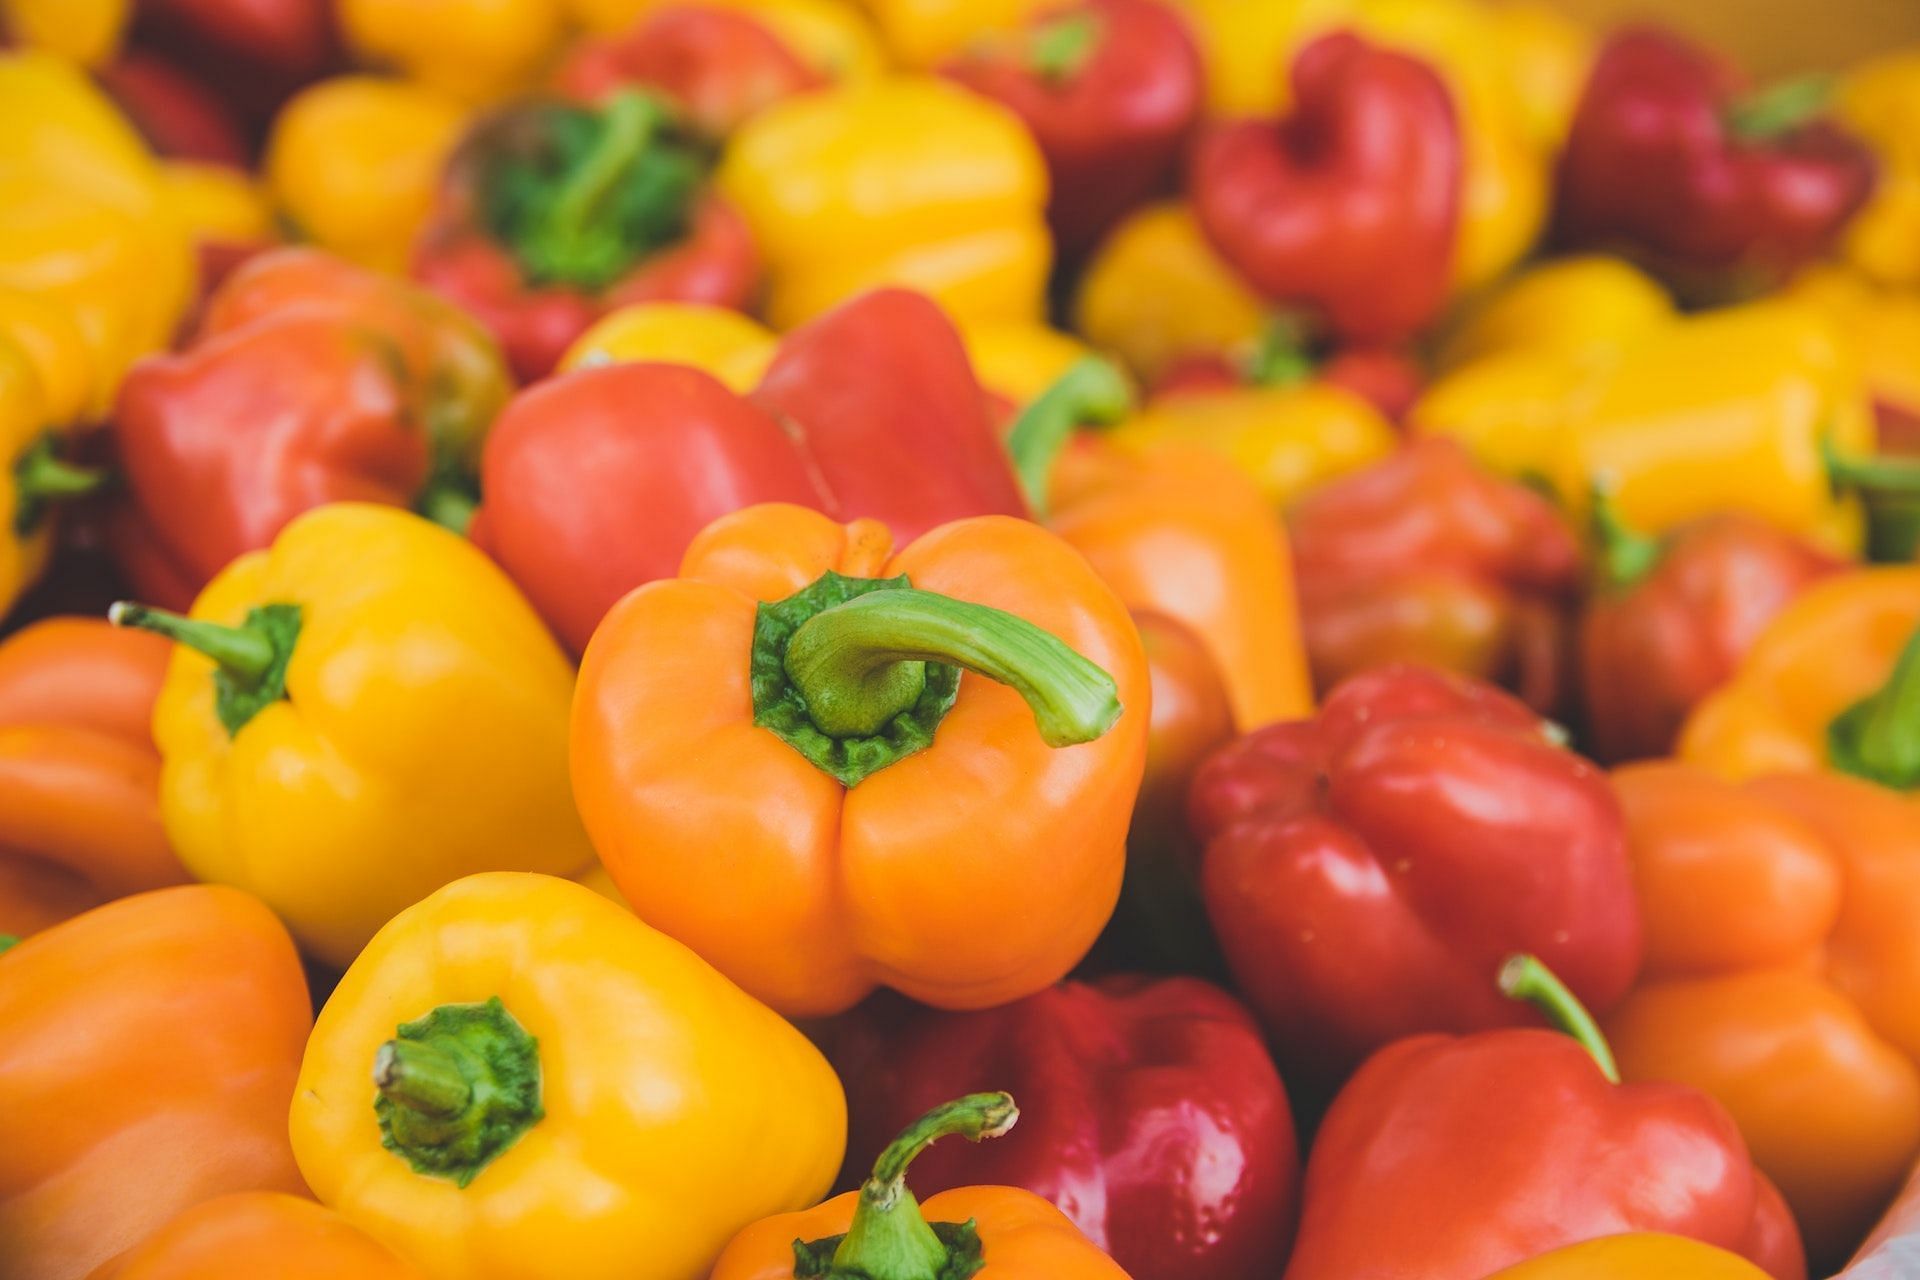 Bell peppers contain plant compounds like lutein, luteolin, capsanthin, quercetin and violaxanthin. (Photo via Pexels/Kai Pilger)